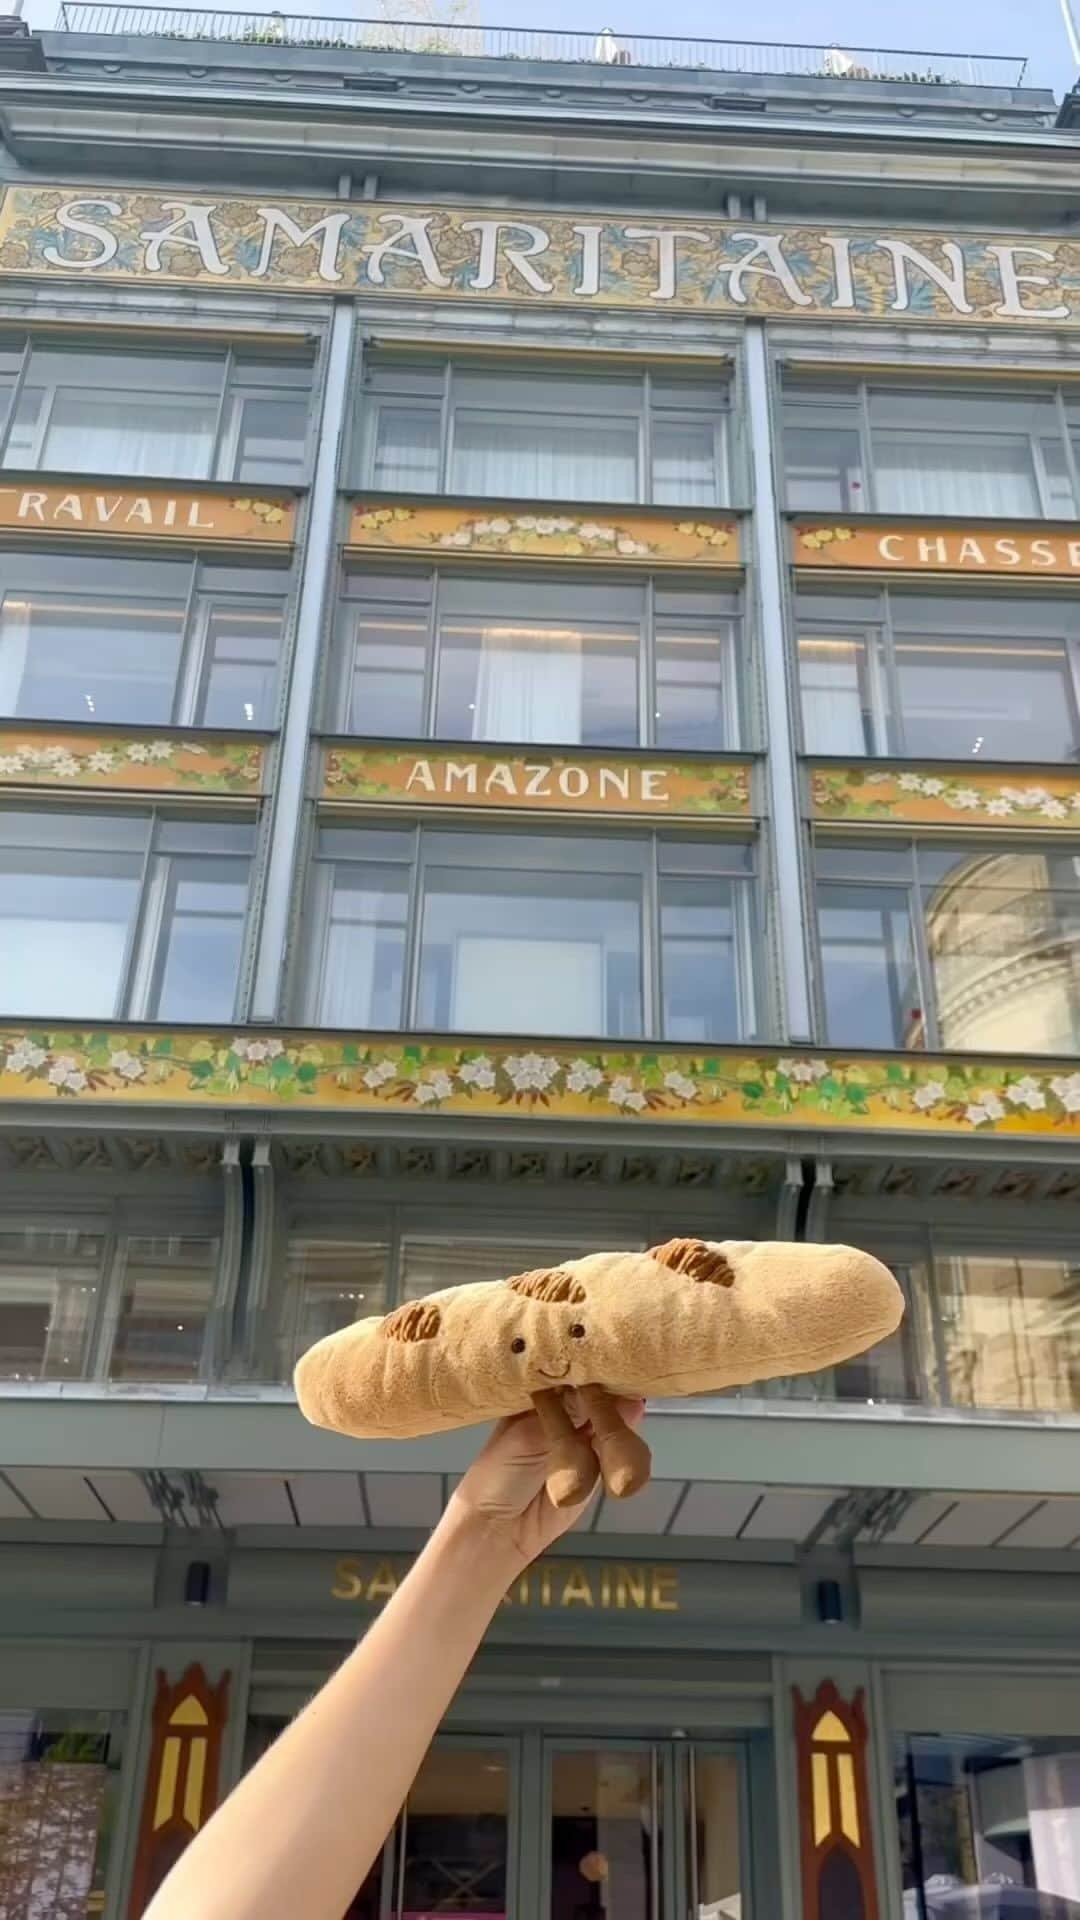 DFS & T Galleriaのインスタグラム：「Discover the exclusive @jellycat baguette at Samaritaine! You‘ll find it at Boutique de Loulou: a place that holds pretty and trendy items in a chic and joyful universe.  📍Ground floor, Pont-Neuf side   @samaritaineparis   #DFSOfficial #Samaritaine #Jellycat」